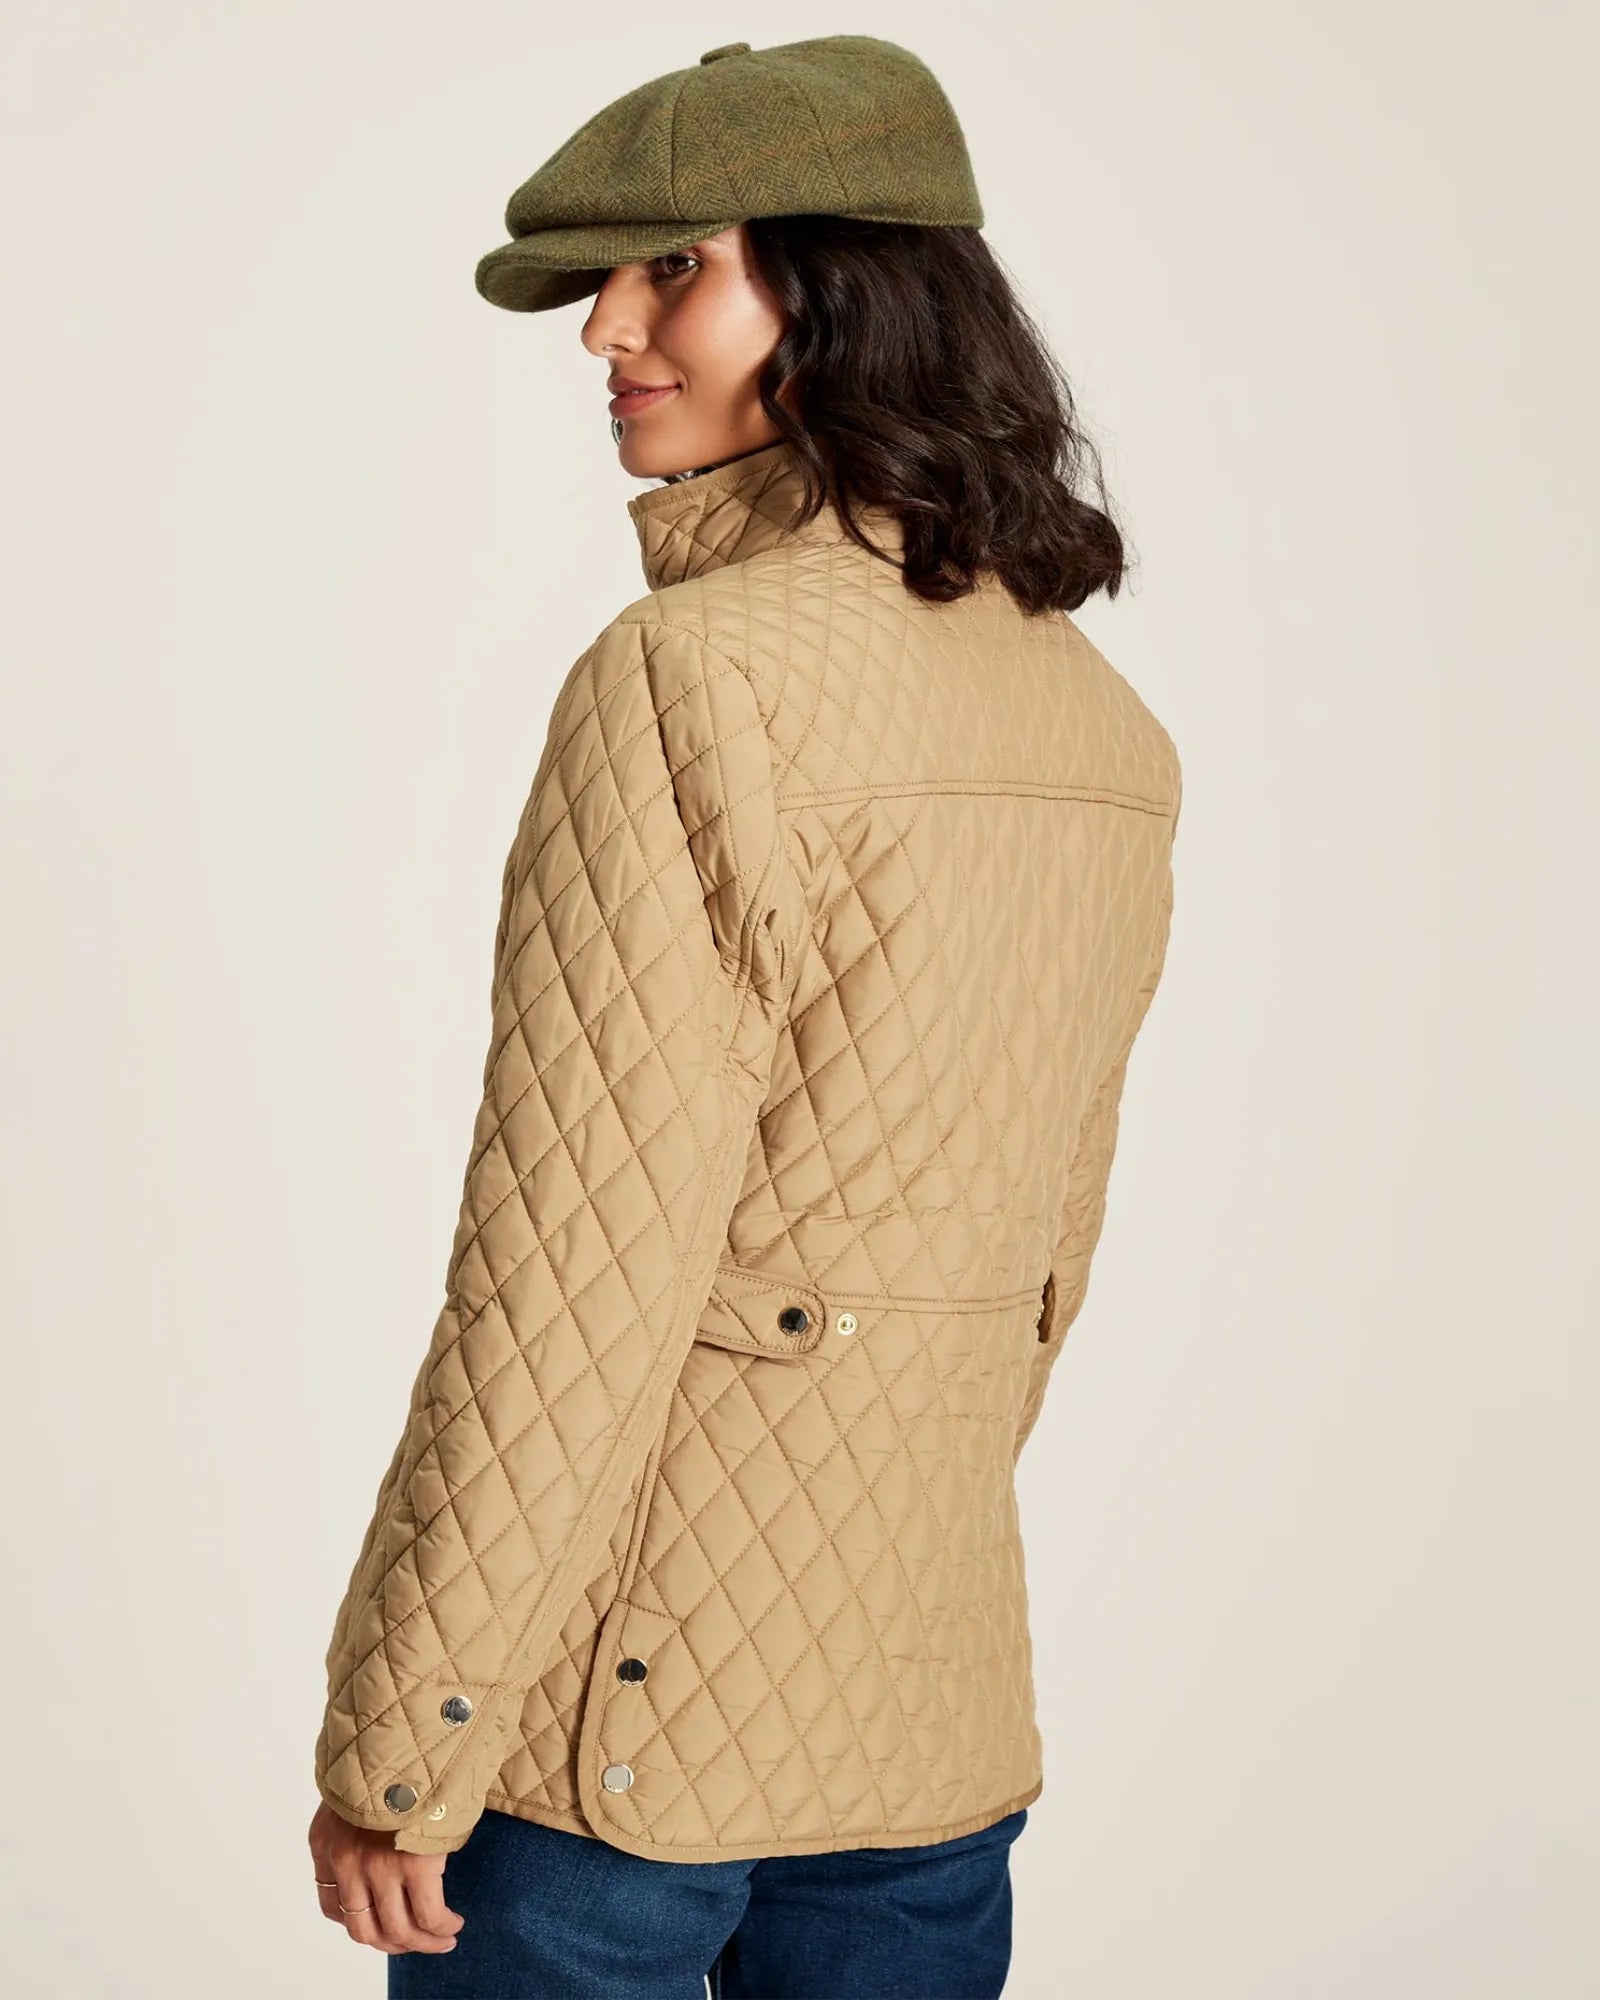 Allendale Brown Quilted Jacket